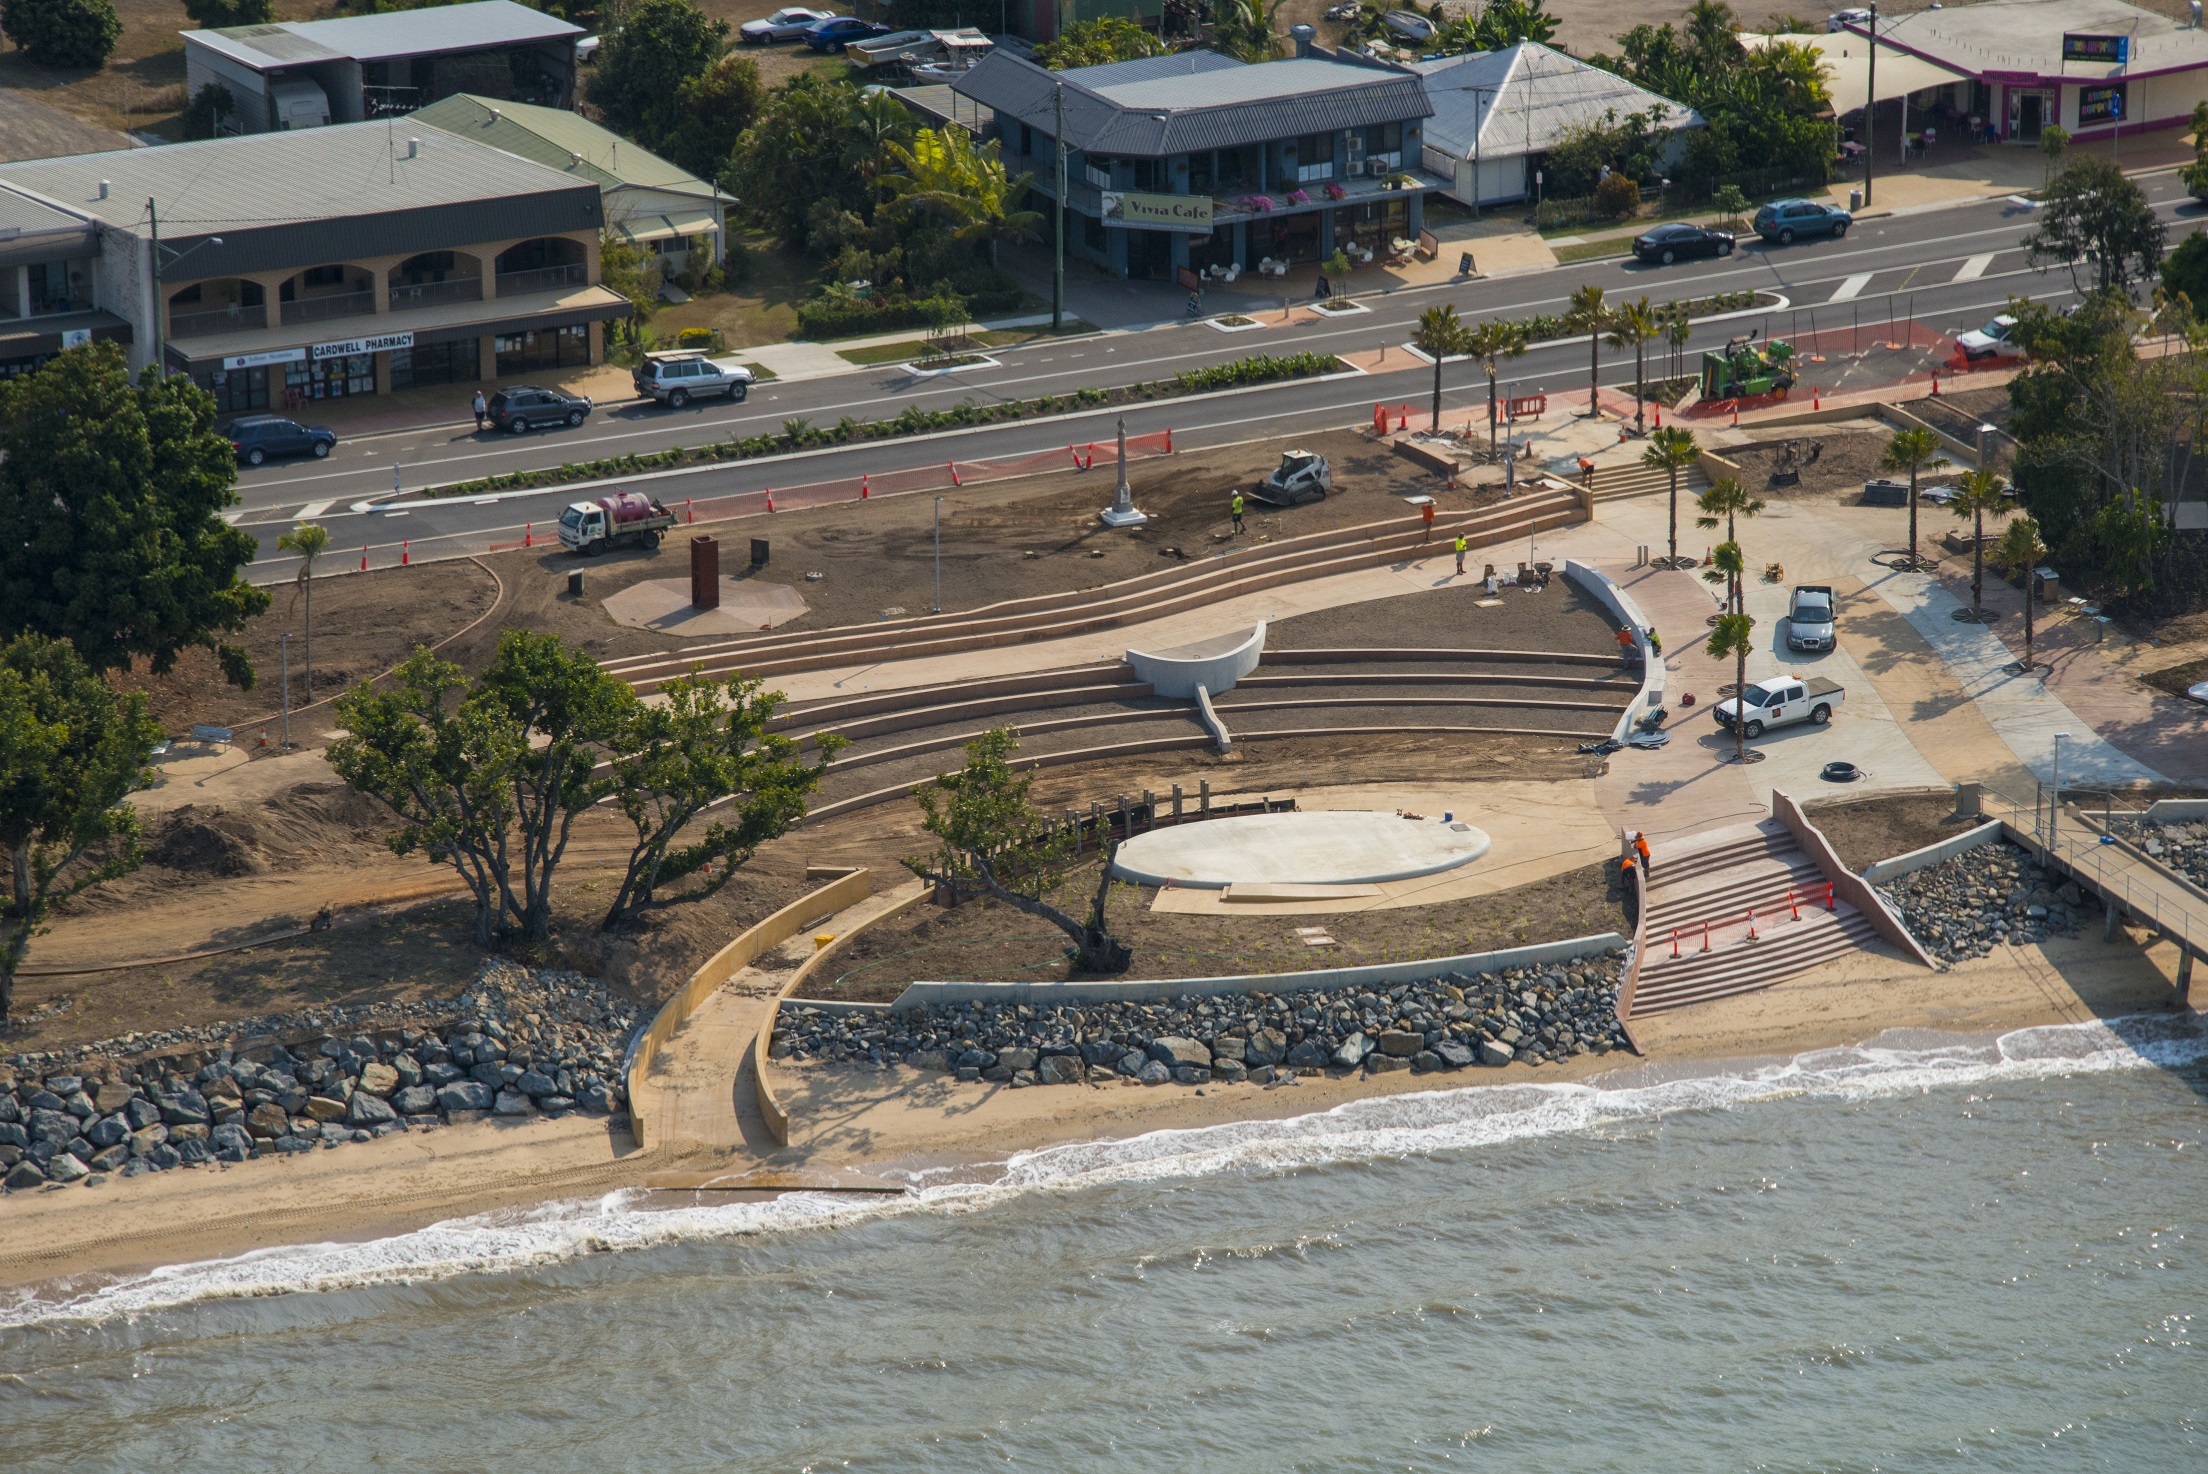 The foreshore works took about 1 year to complete.